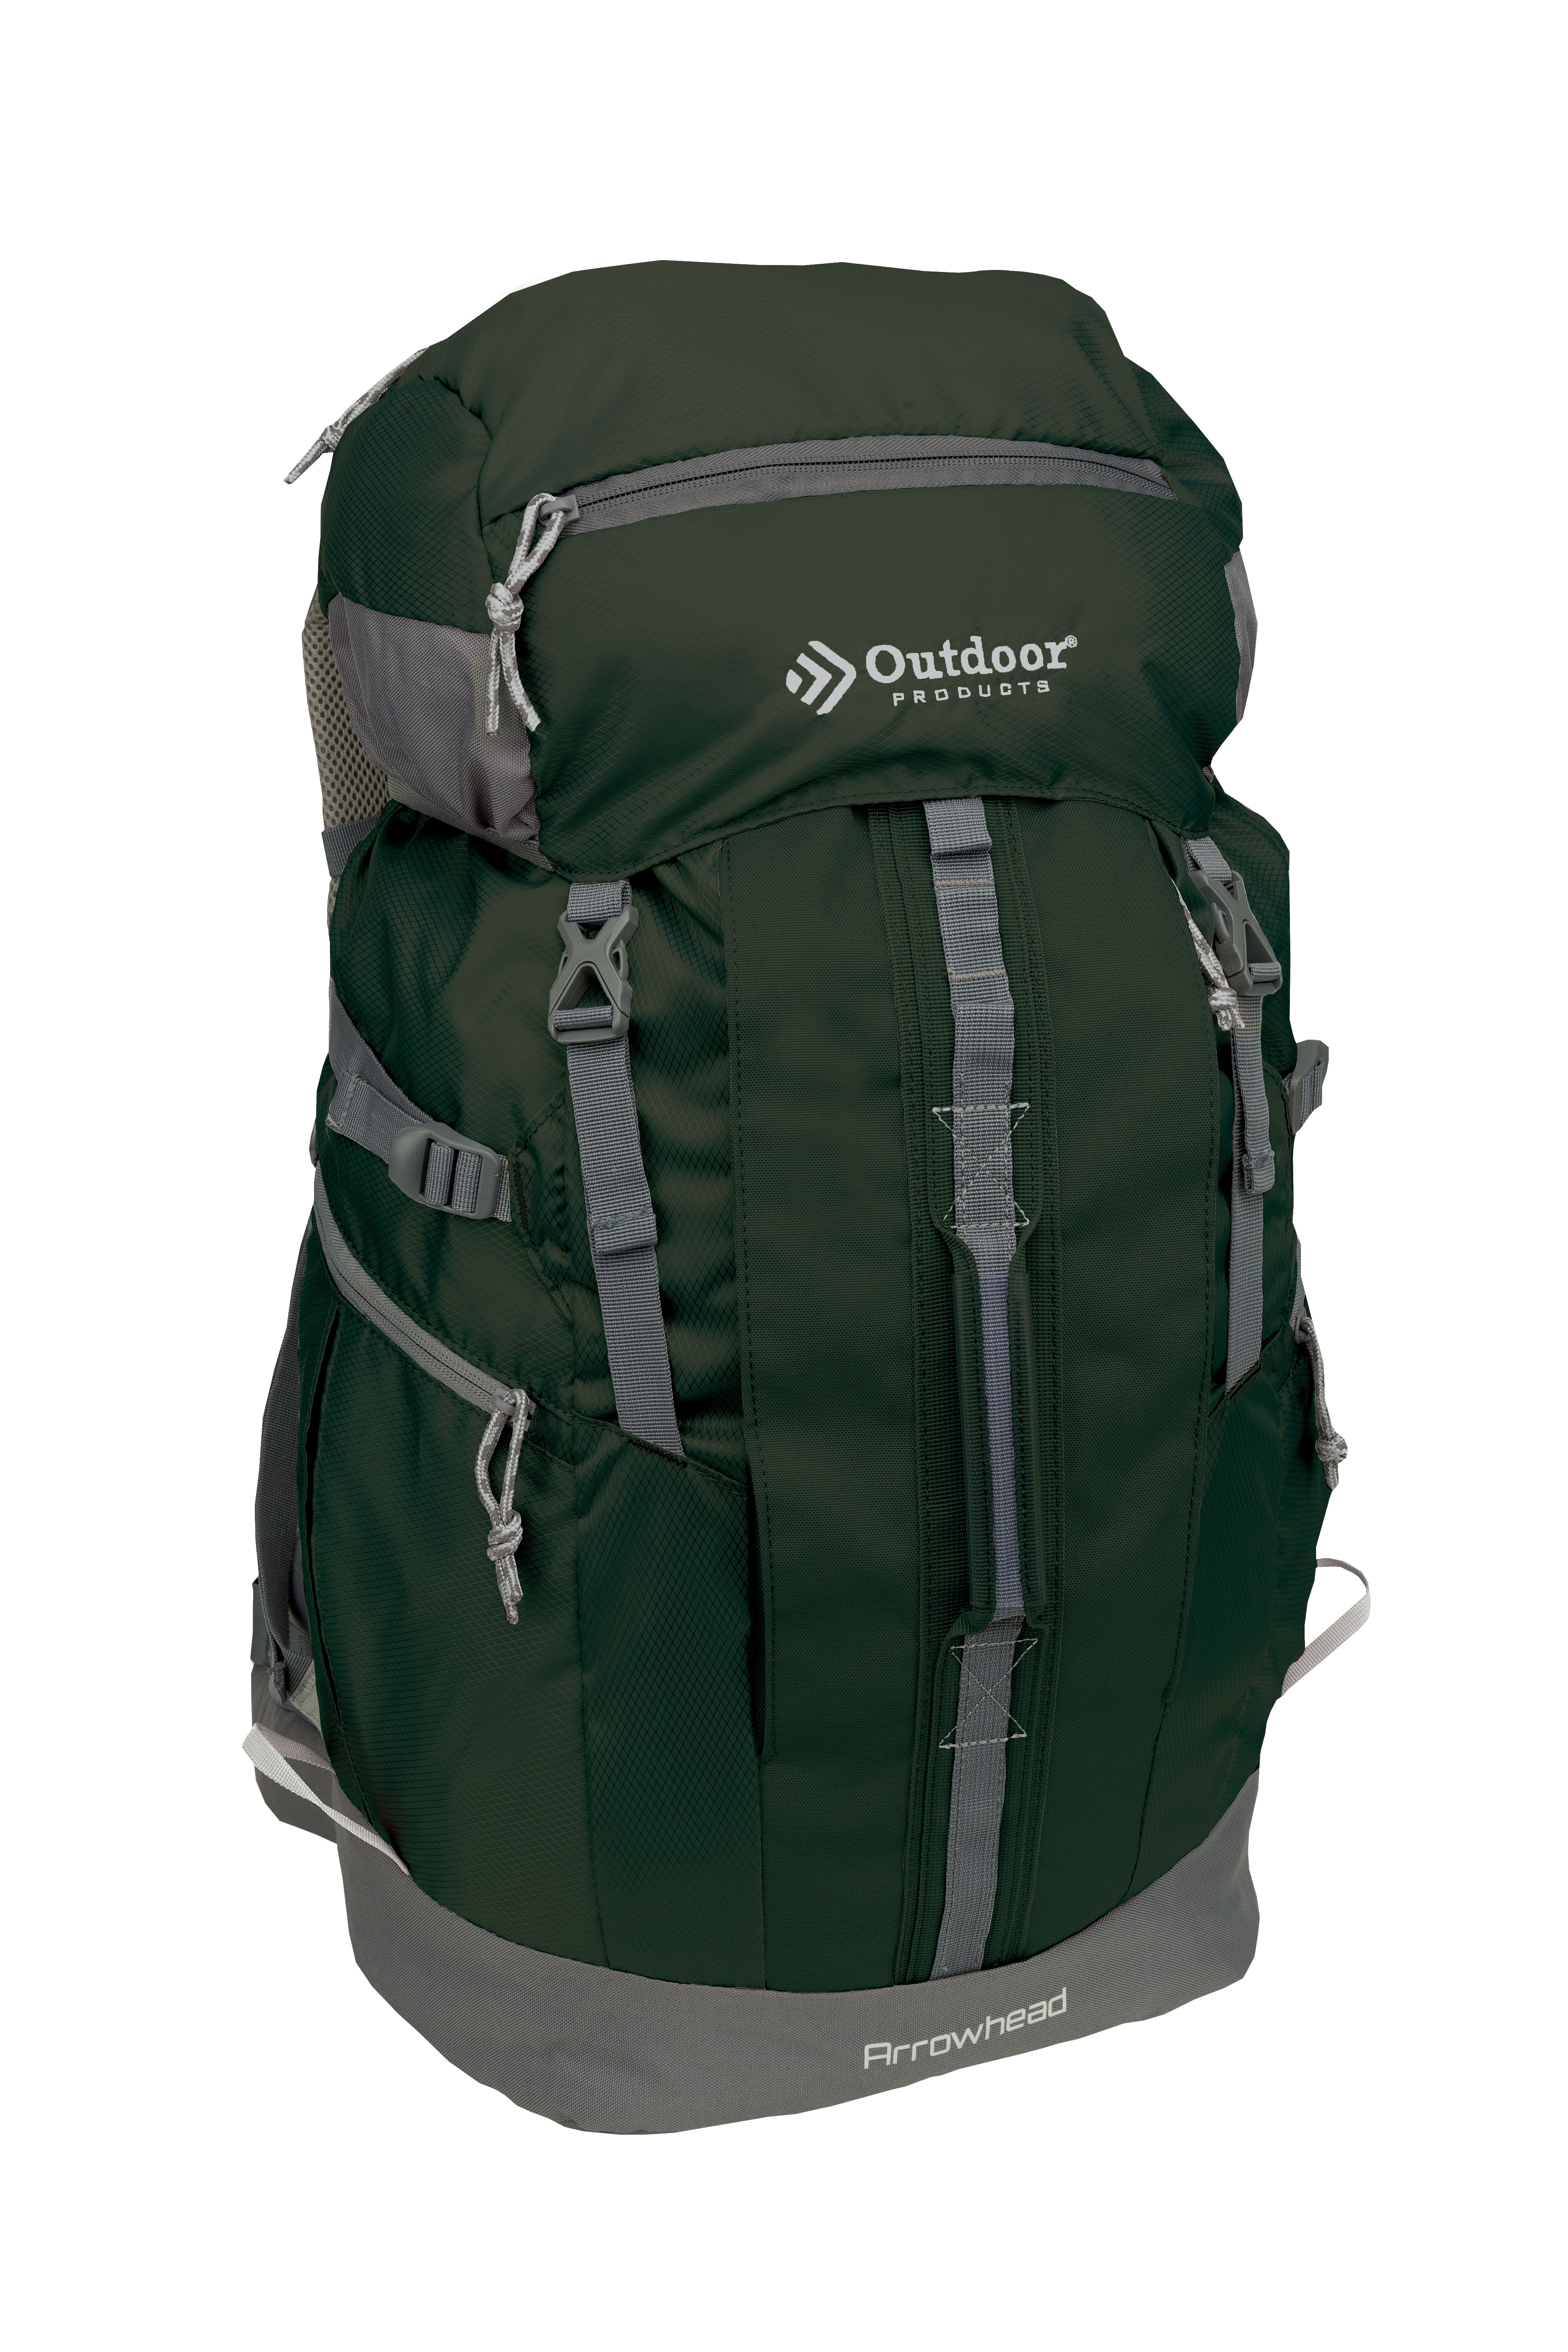 Outdoor Products Arrowhead 47 L Hiking Backpack, Rucksack, Unisex, Green, Adult, Teen, Polyester - image 1 of 14